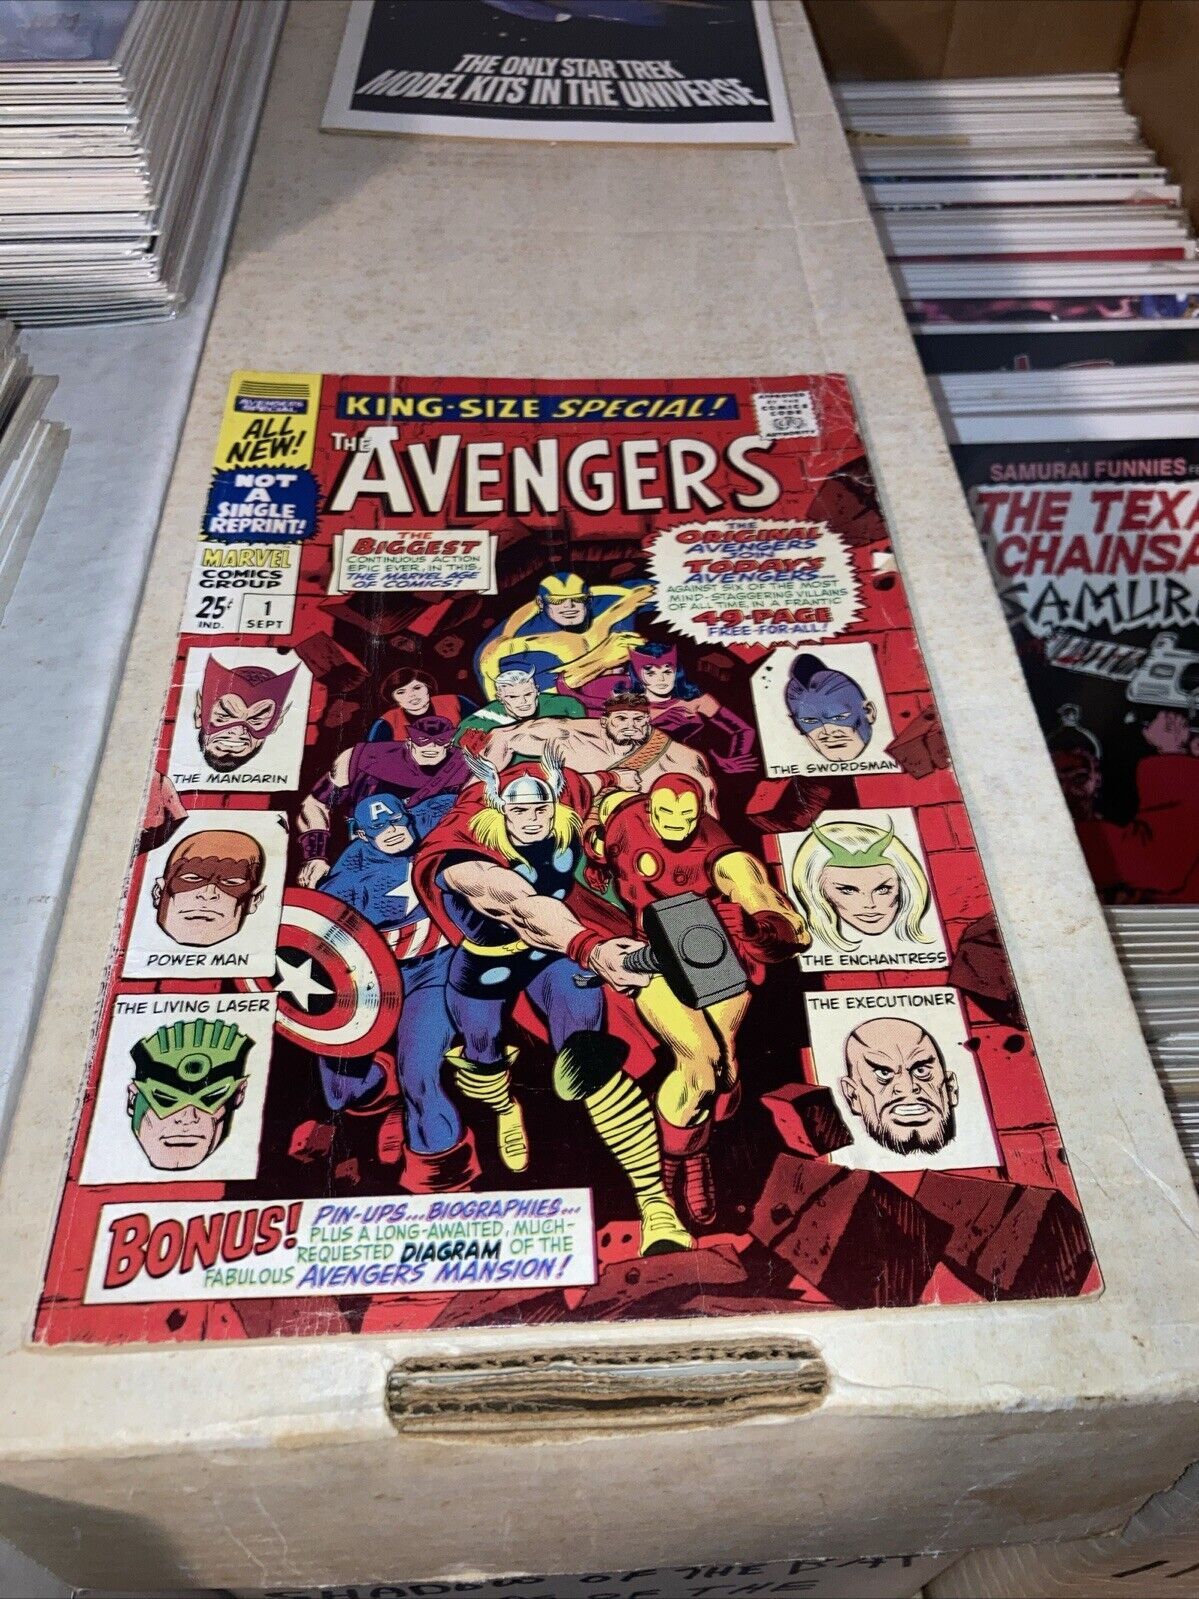 AVENGERS King Size Special #1, Marvel 1967, Stan Lee & Roy Thomas Good Rare Cool